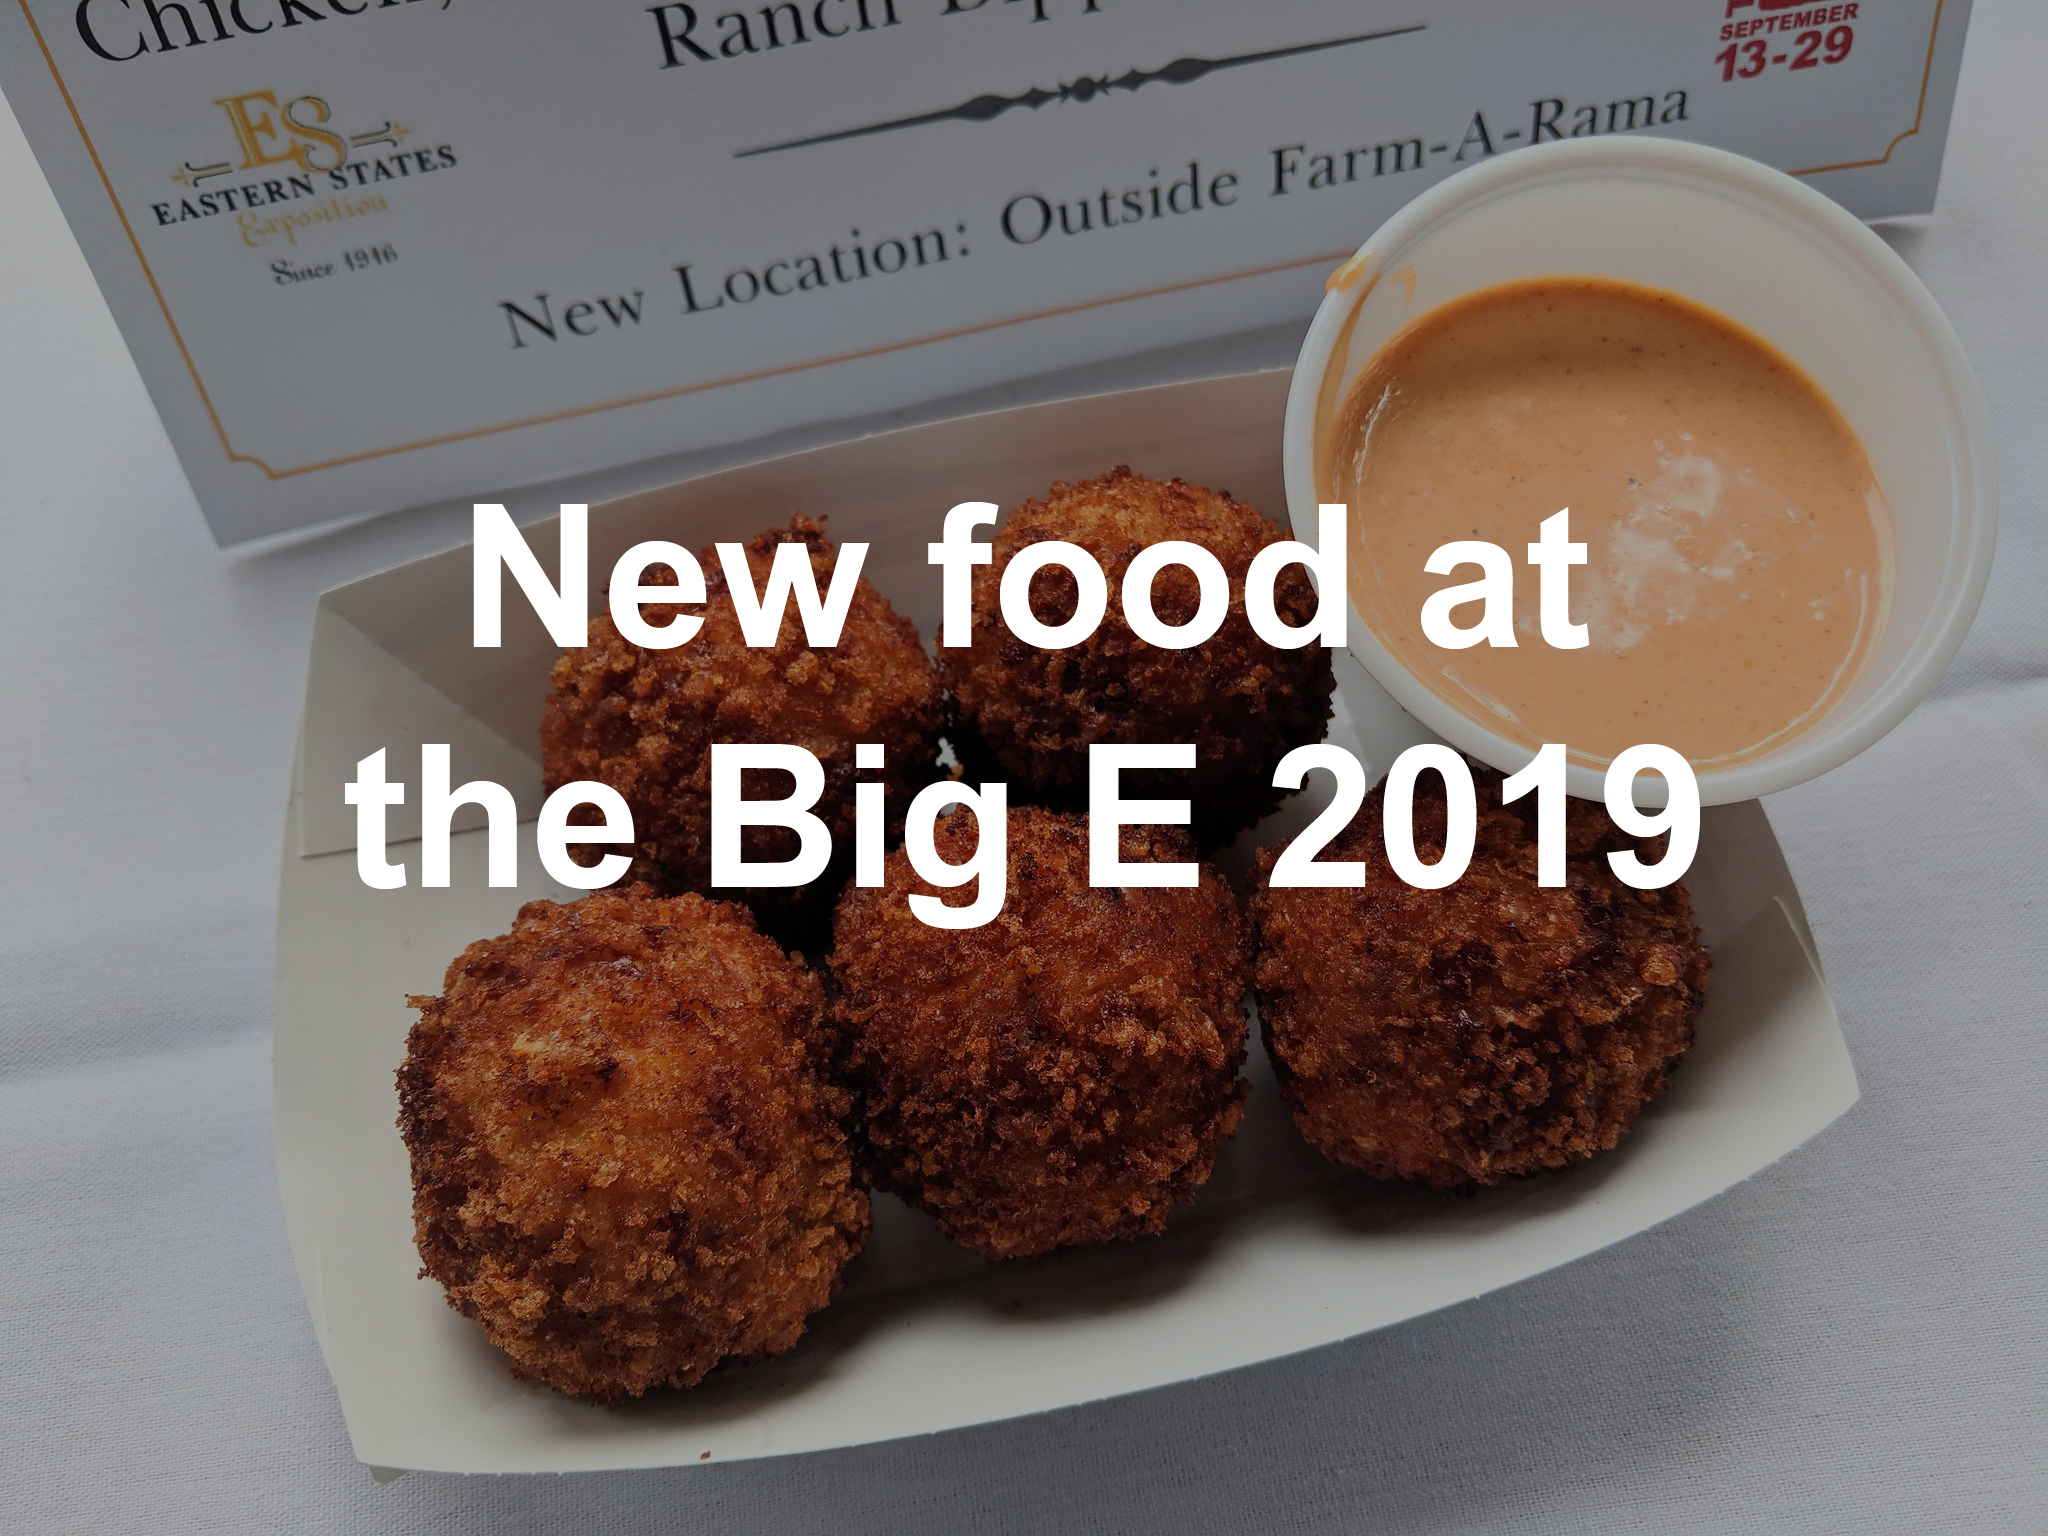 New foods at the Big E for 2019